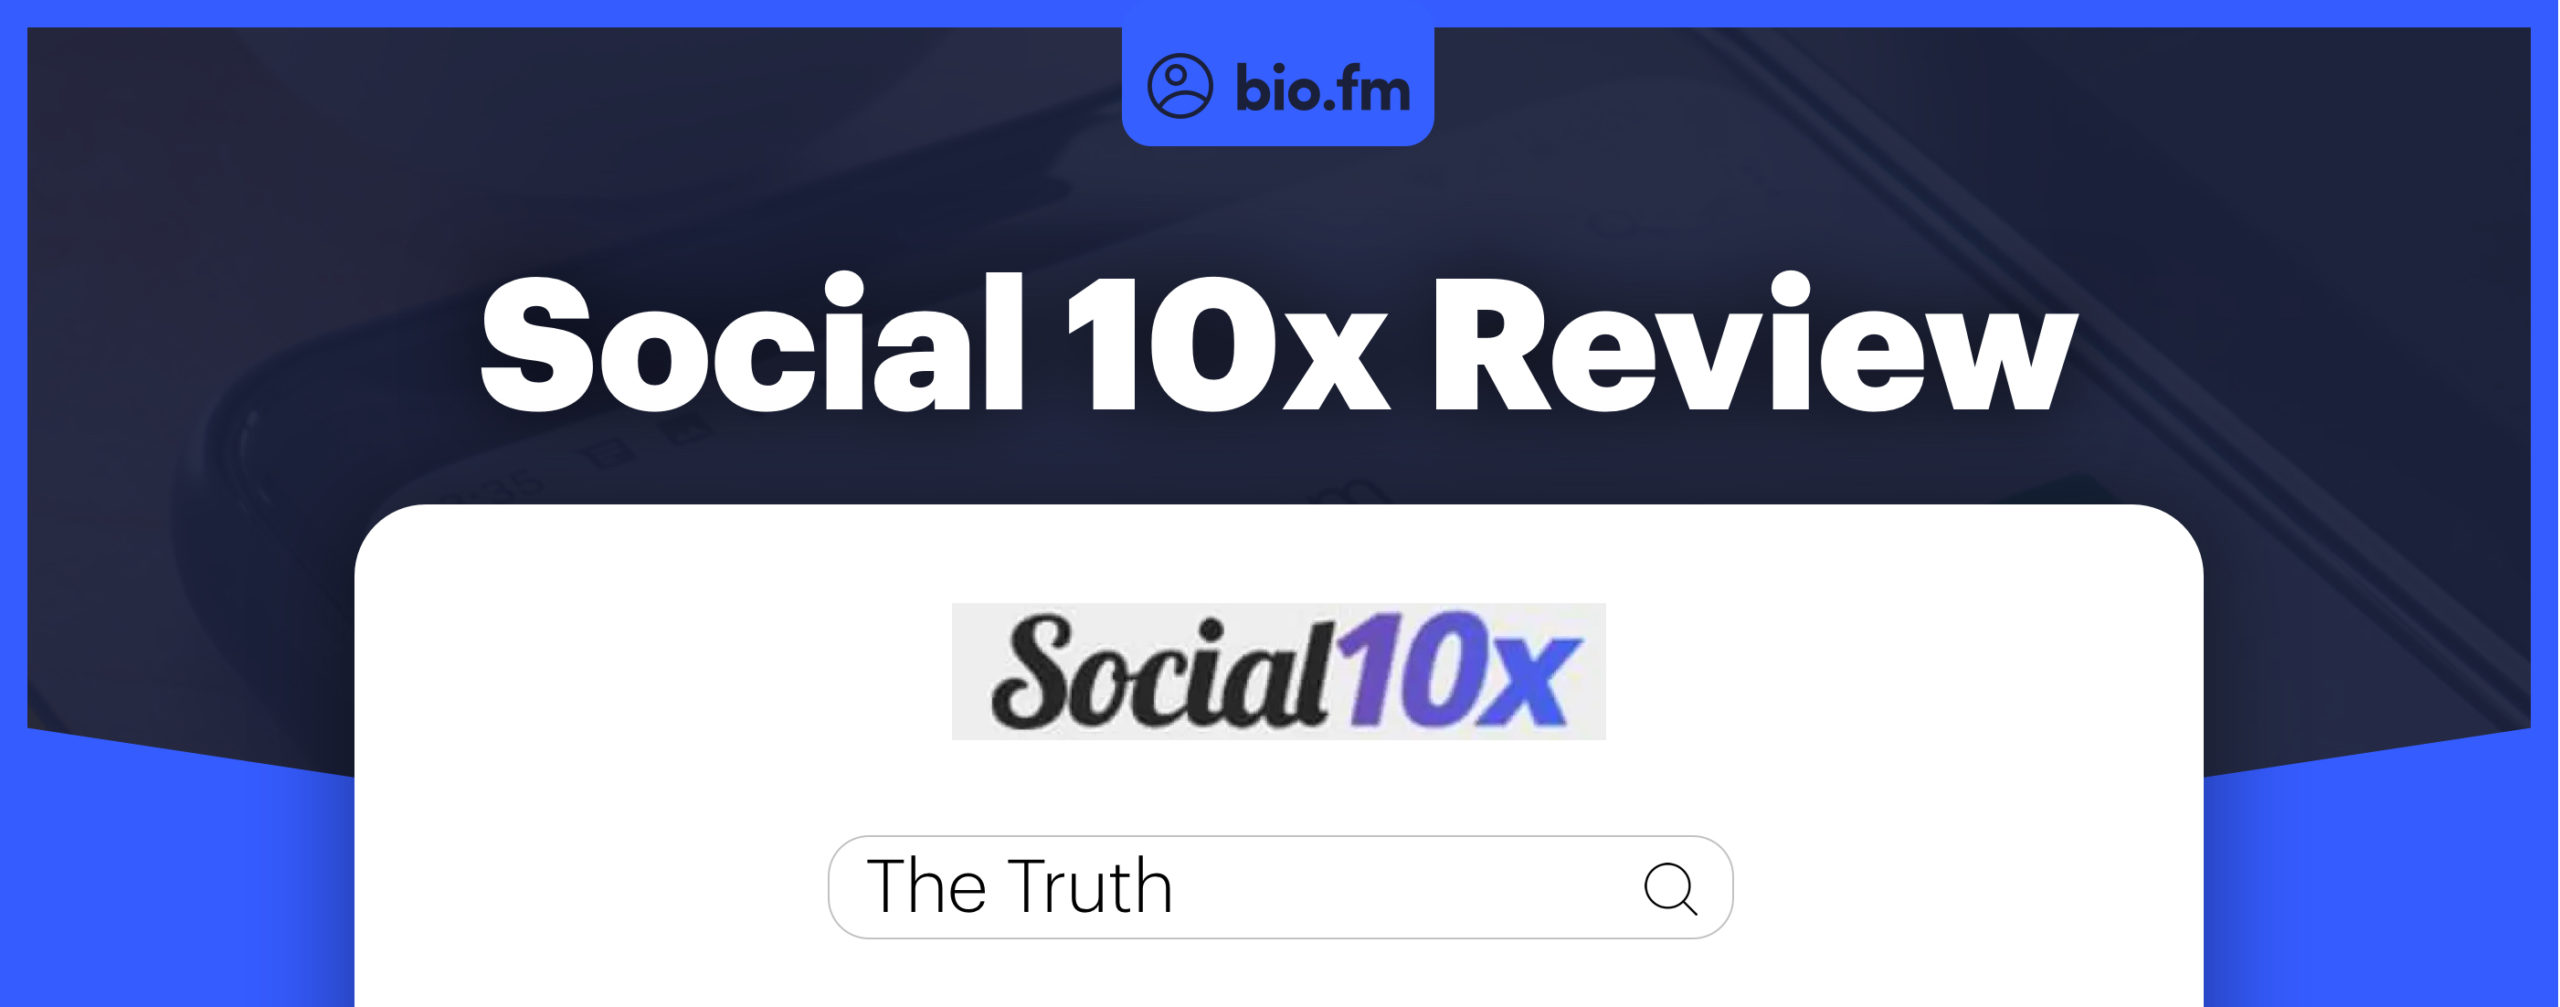 social10x review featured image